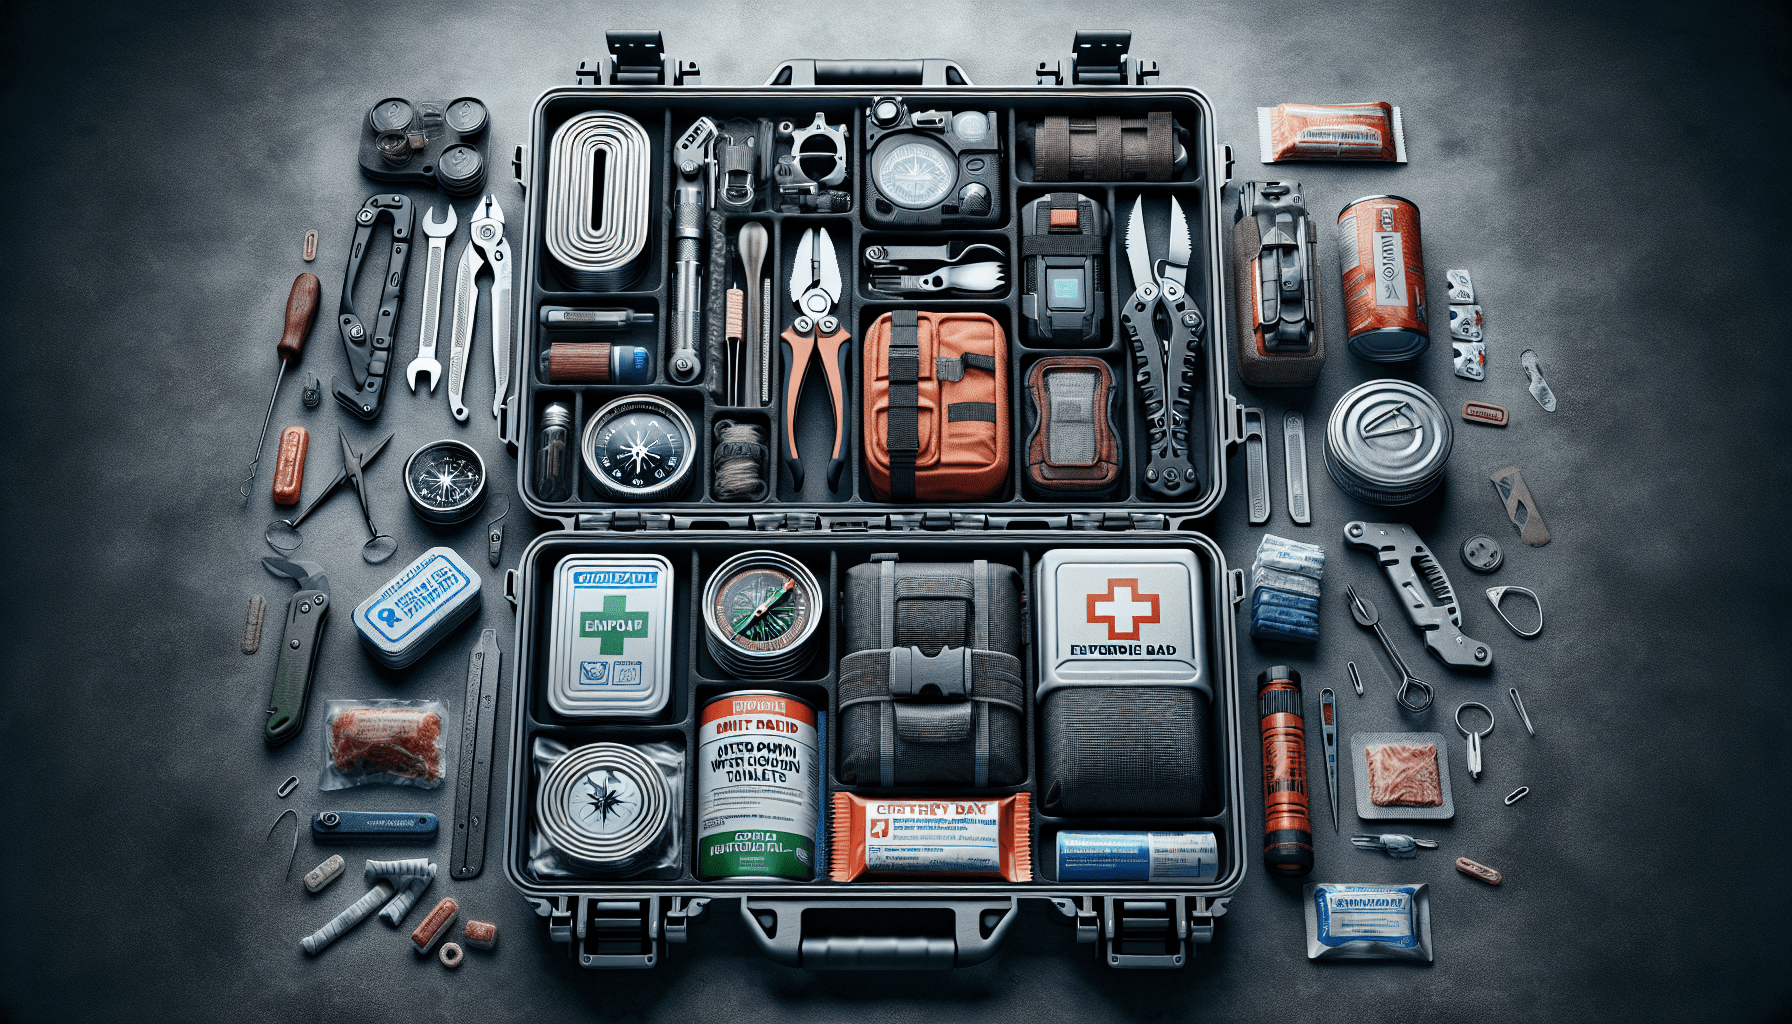 What Makes A Good Survival Kit?